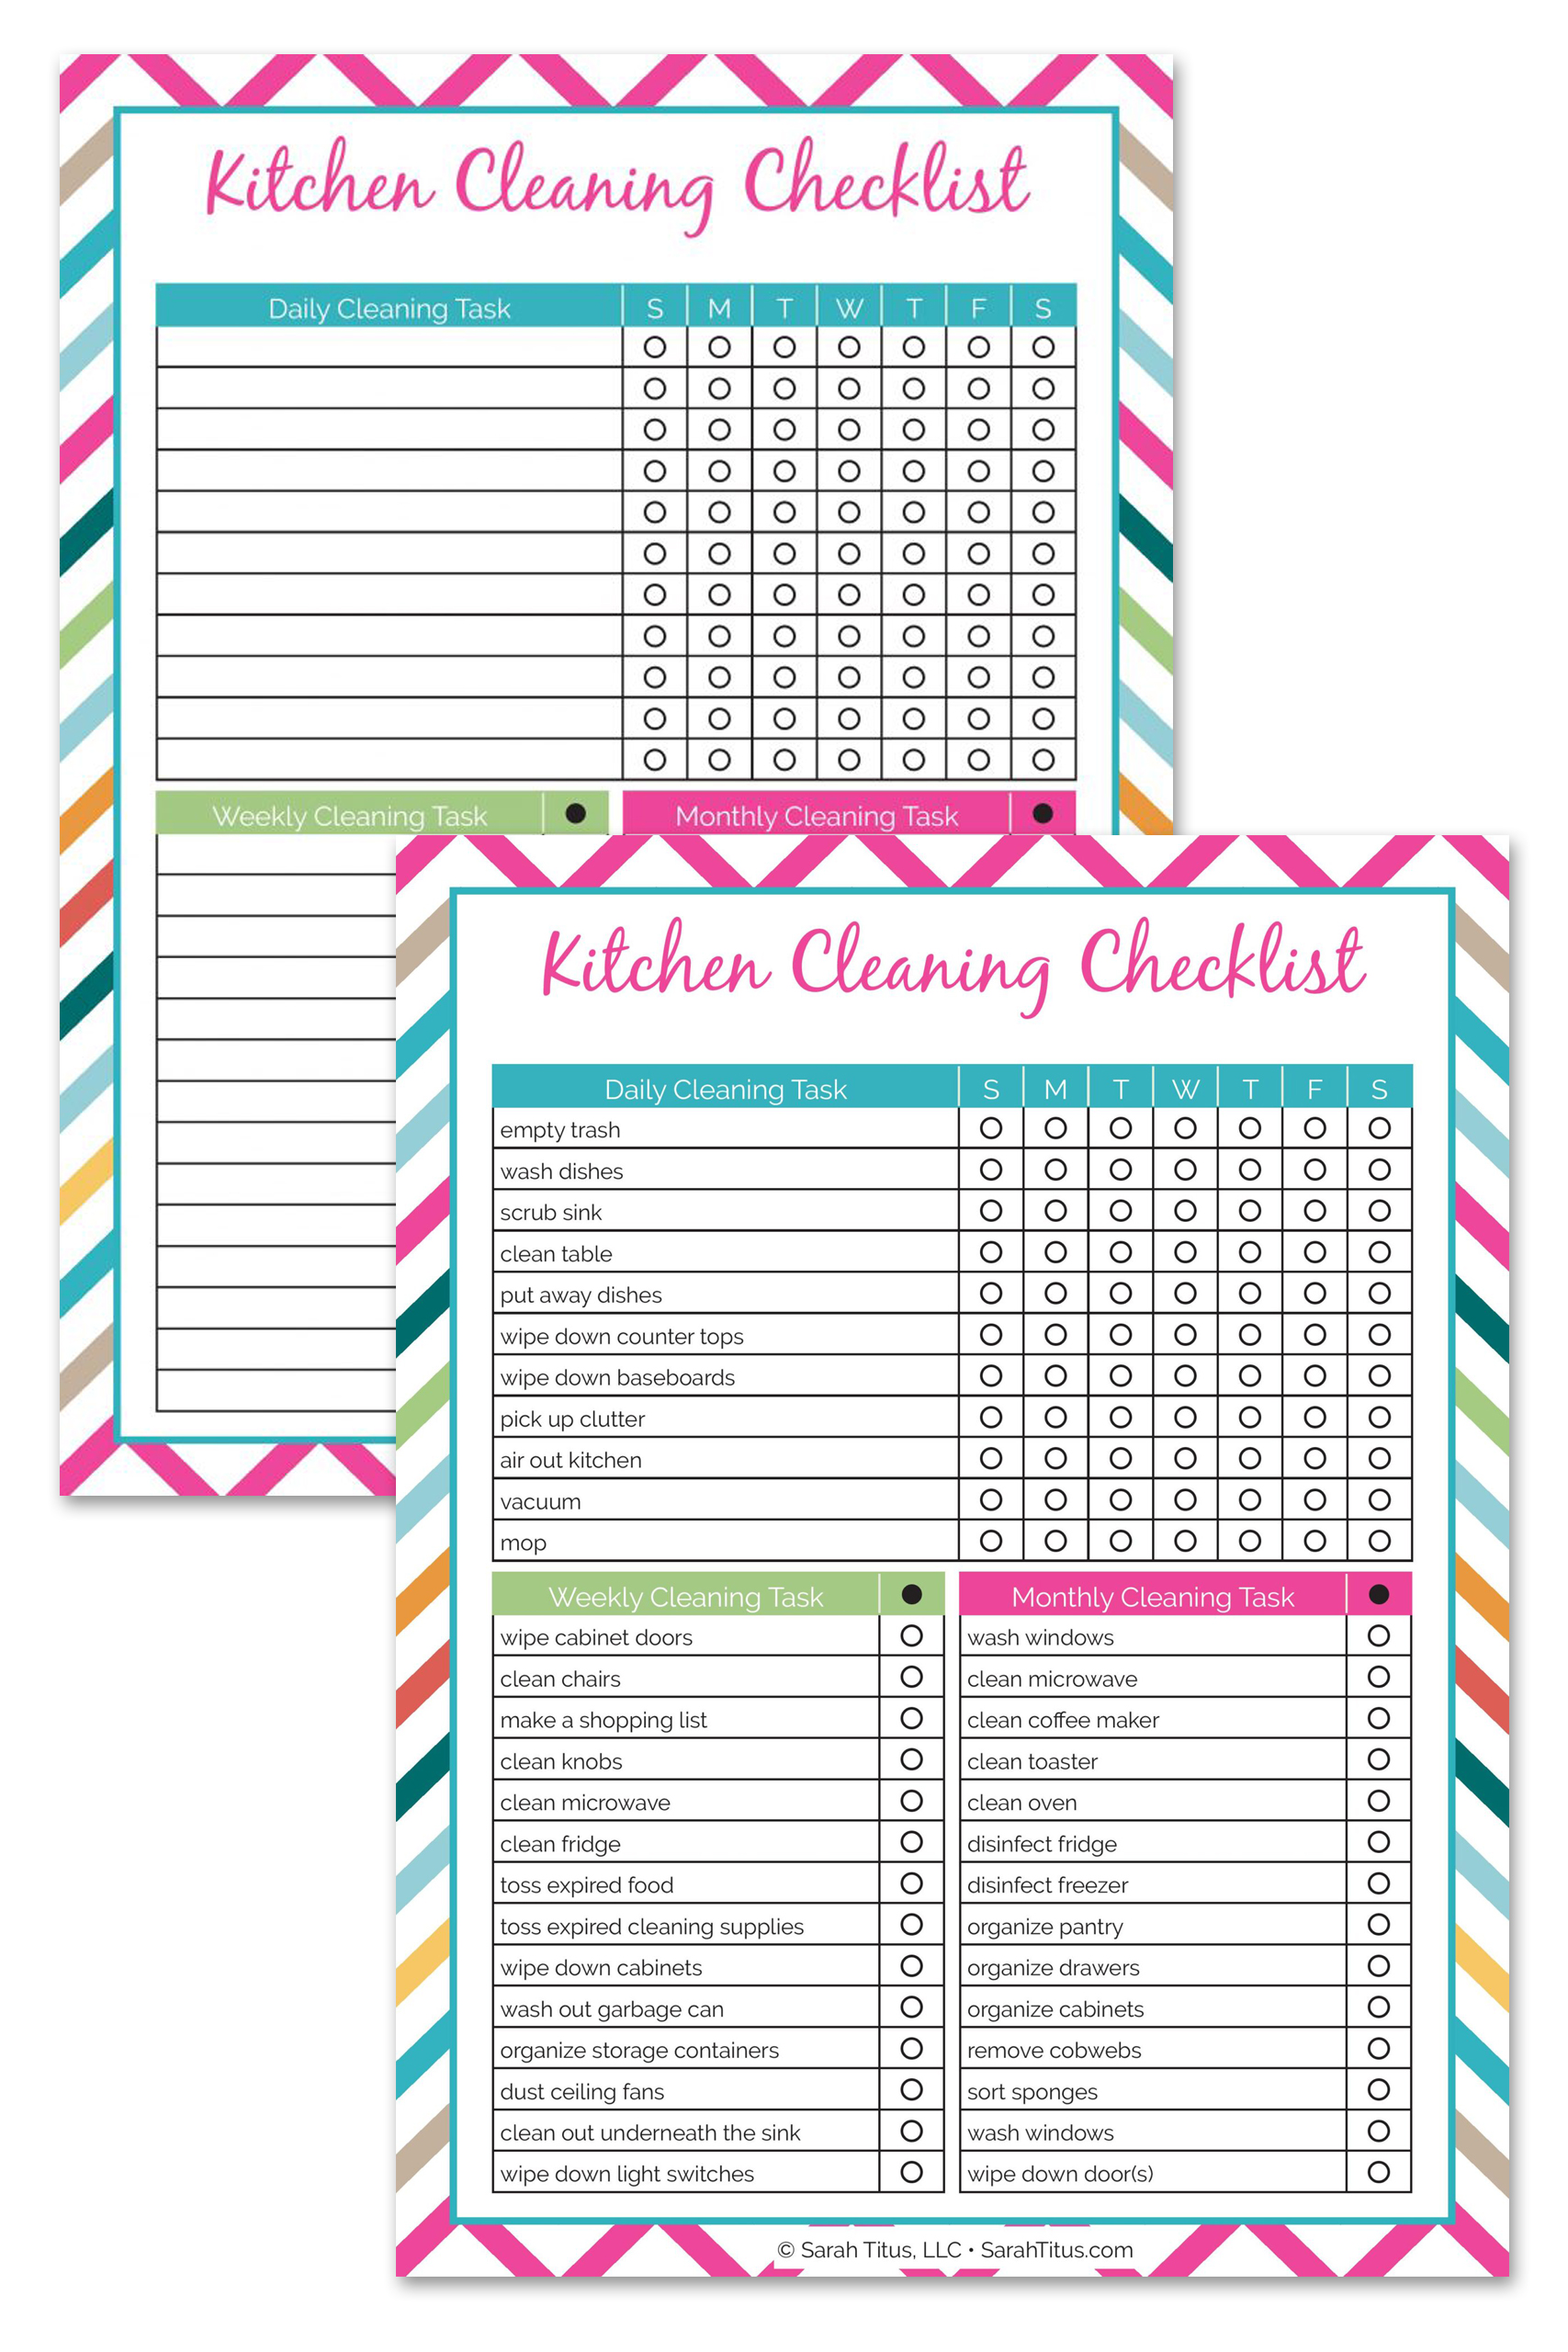 Seasonal Kitchen Cleaning Checklist - Clean and Scentsible